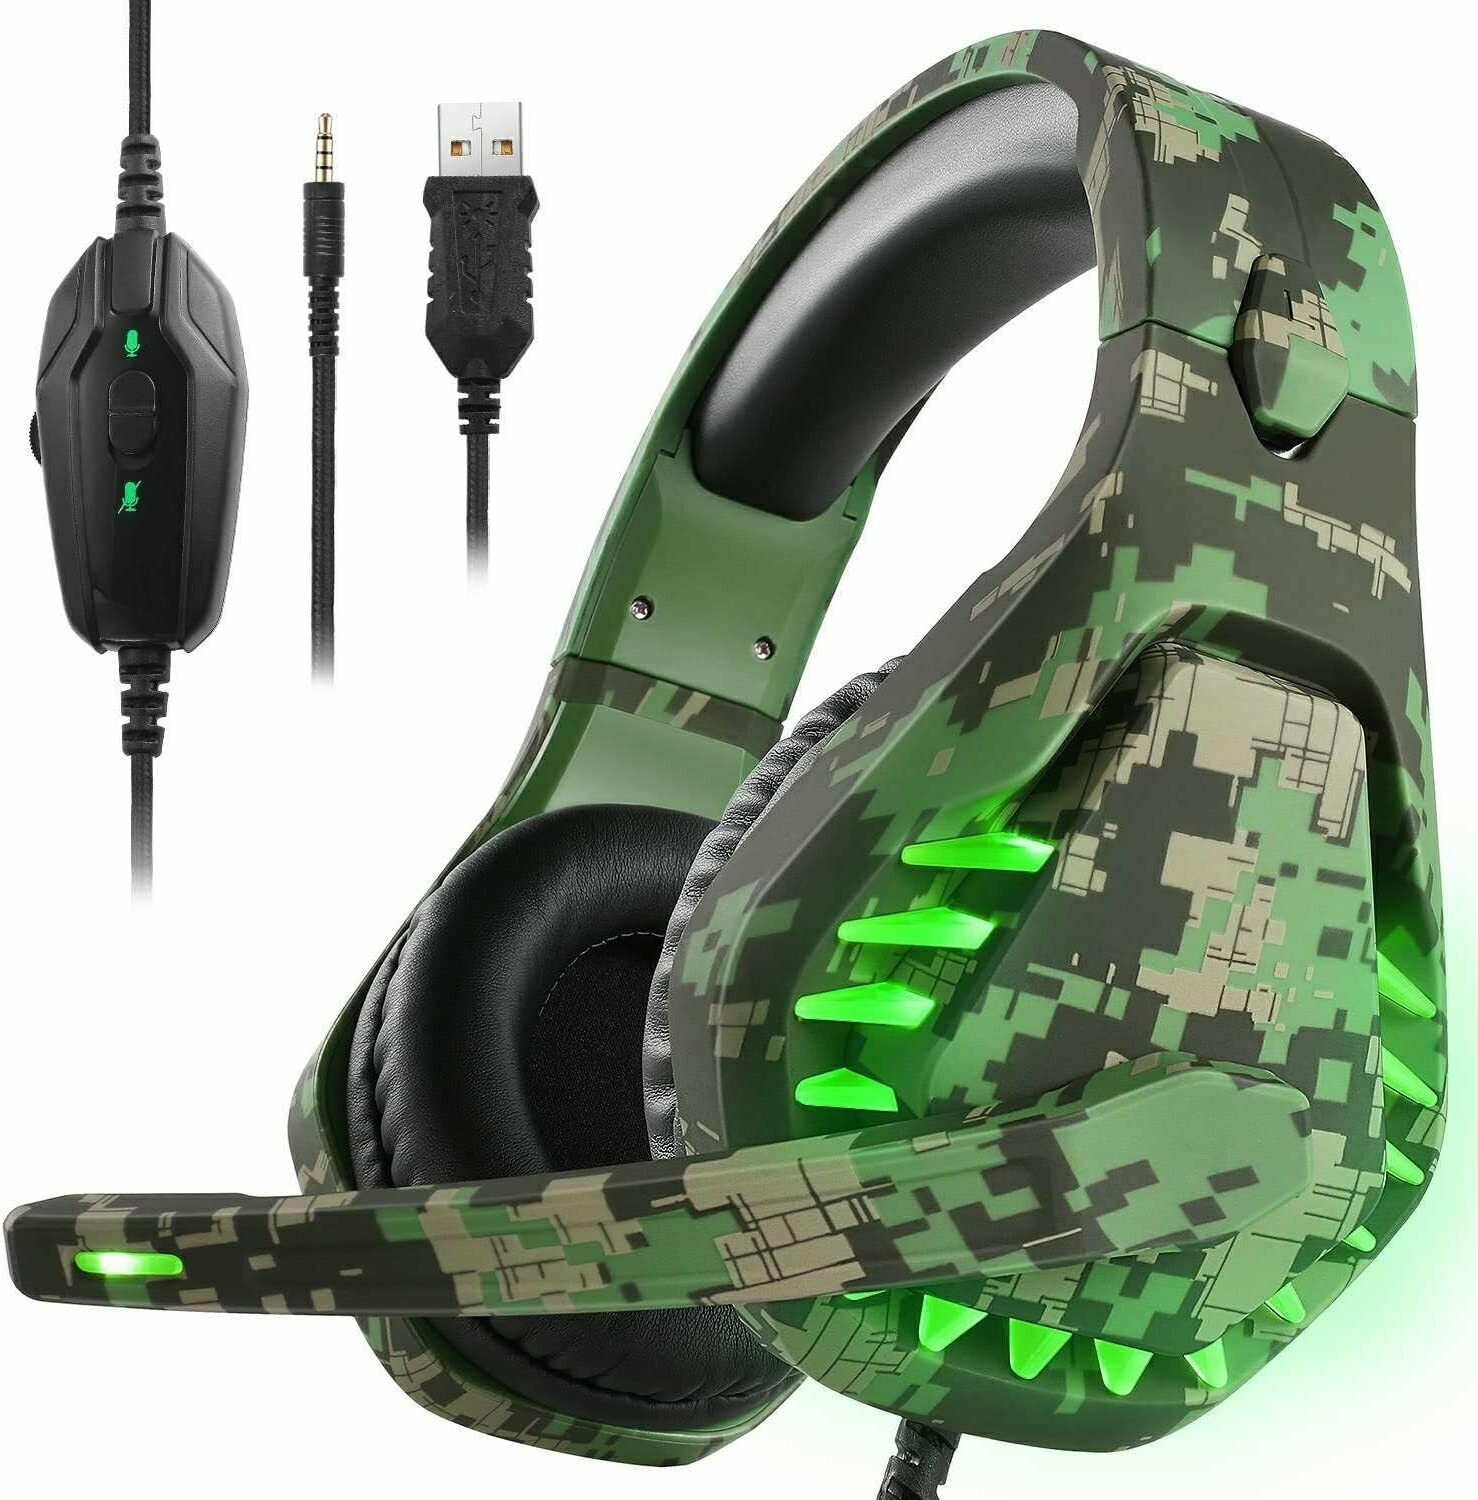 vleugel Geven verlamming Gaming headset for PS4 Xbox One PC Headphones with Microphone Nintendo  Switch Games Laptop PS3